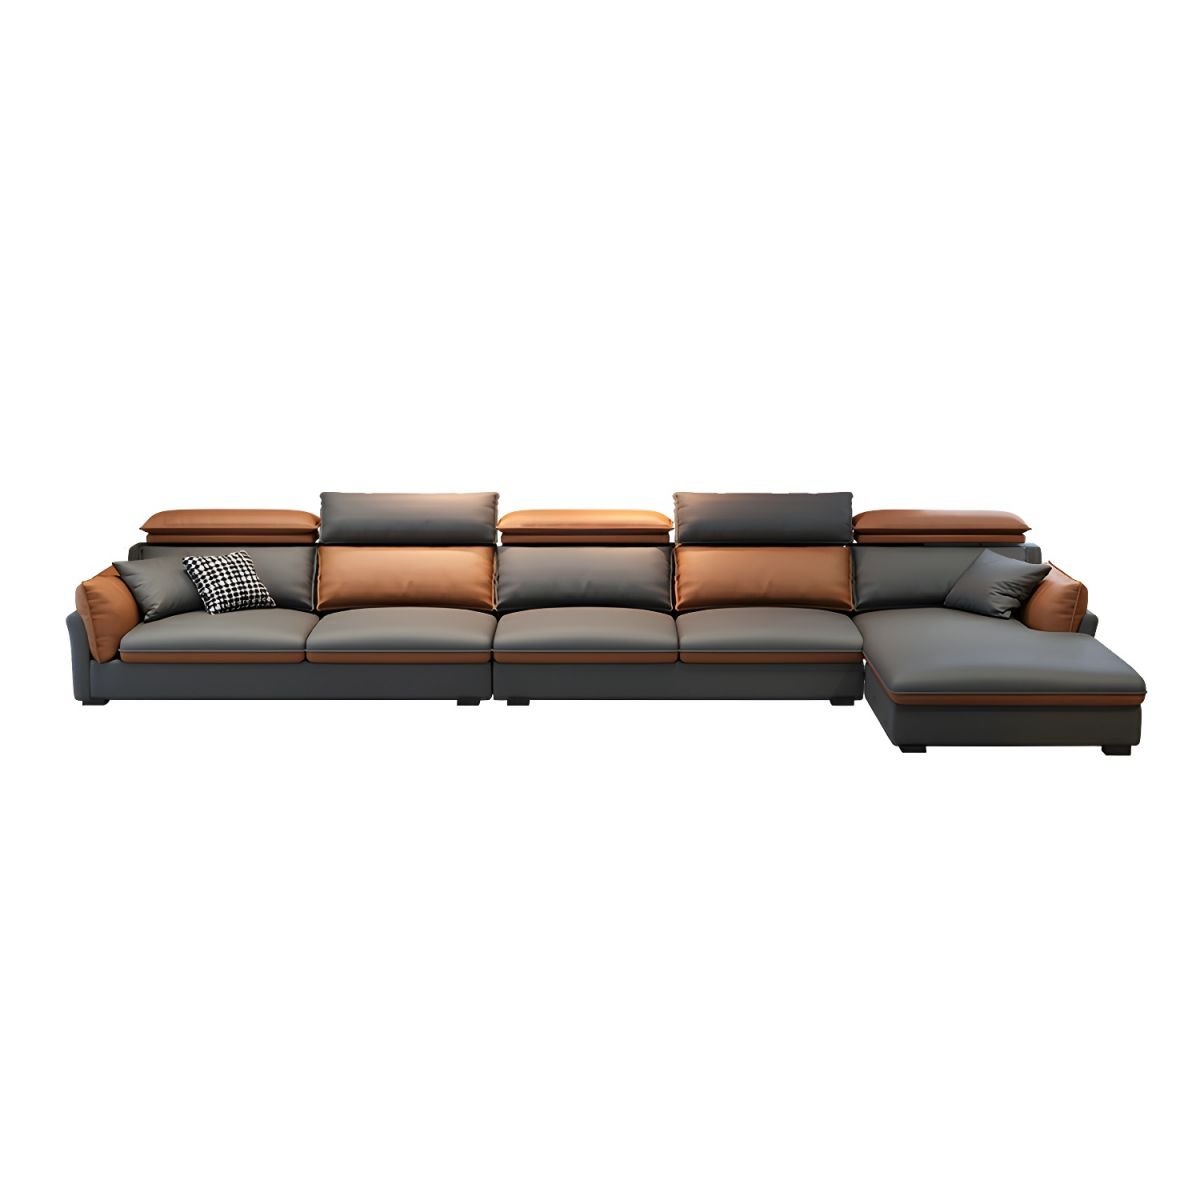 Contemporary Pillow Top Arm Sectional Sofa in Gray and Orange with Adjustable Back - 154"L x 71"W x 31"H Tech Cloth